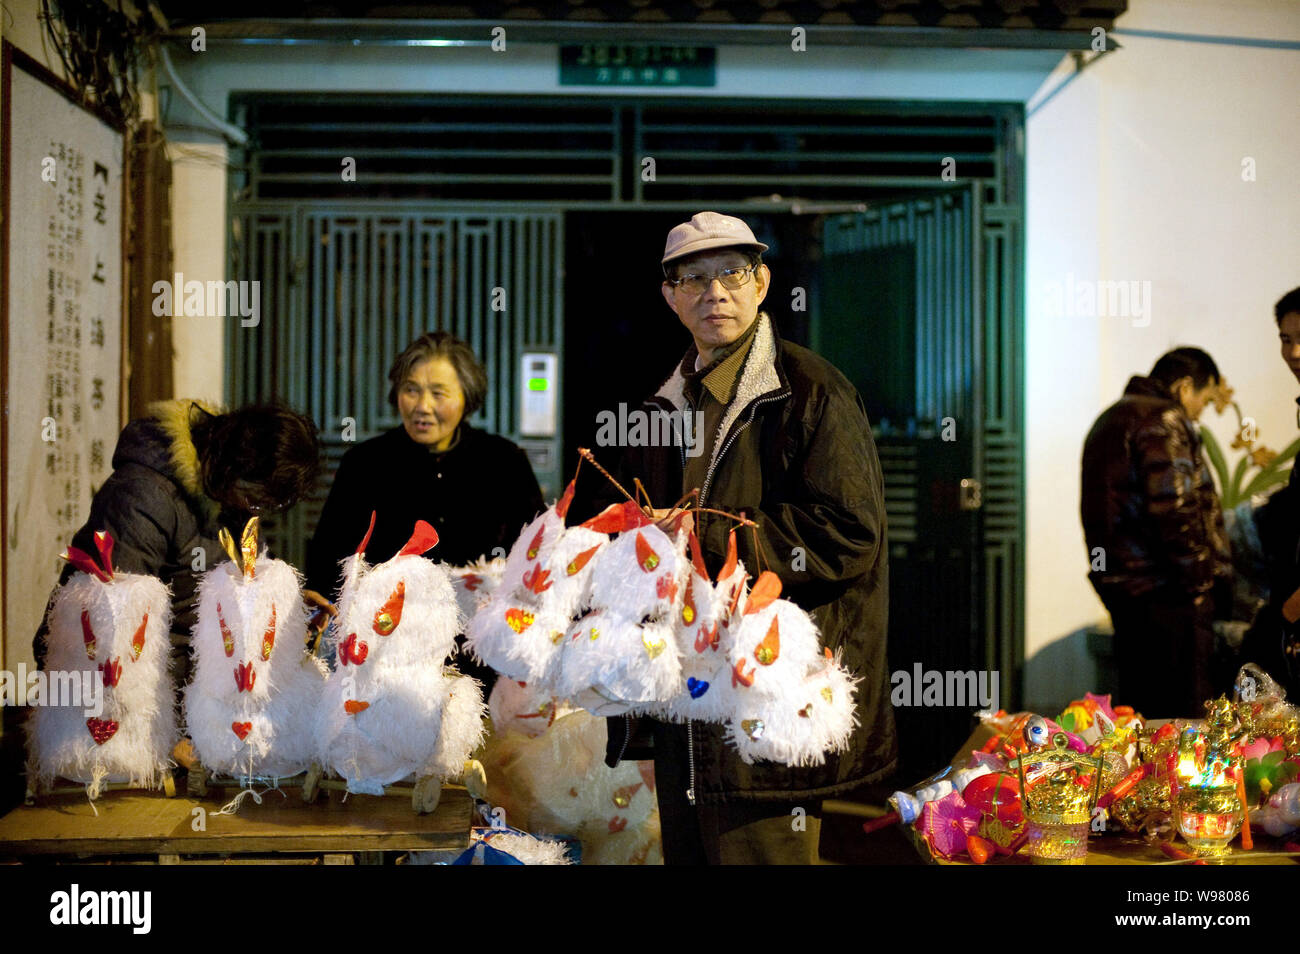 Chinese venders sell rabbit lanterns during the Lantern Festival celebration at the City God Temple (Chenghuang Miao) in Shanghai, China, February 17, Stock Photo